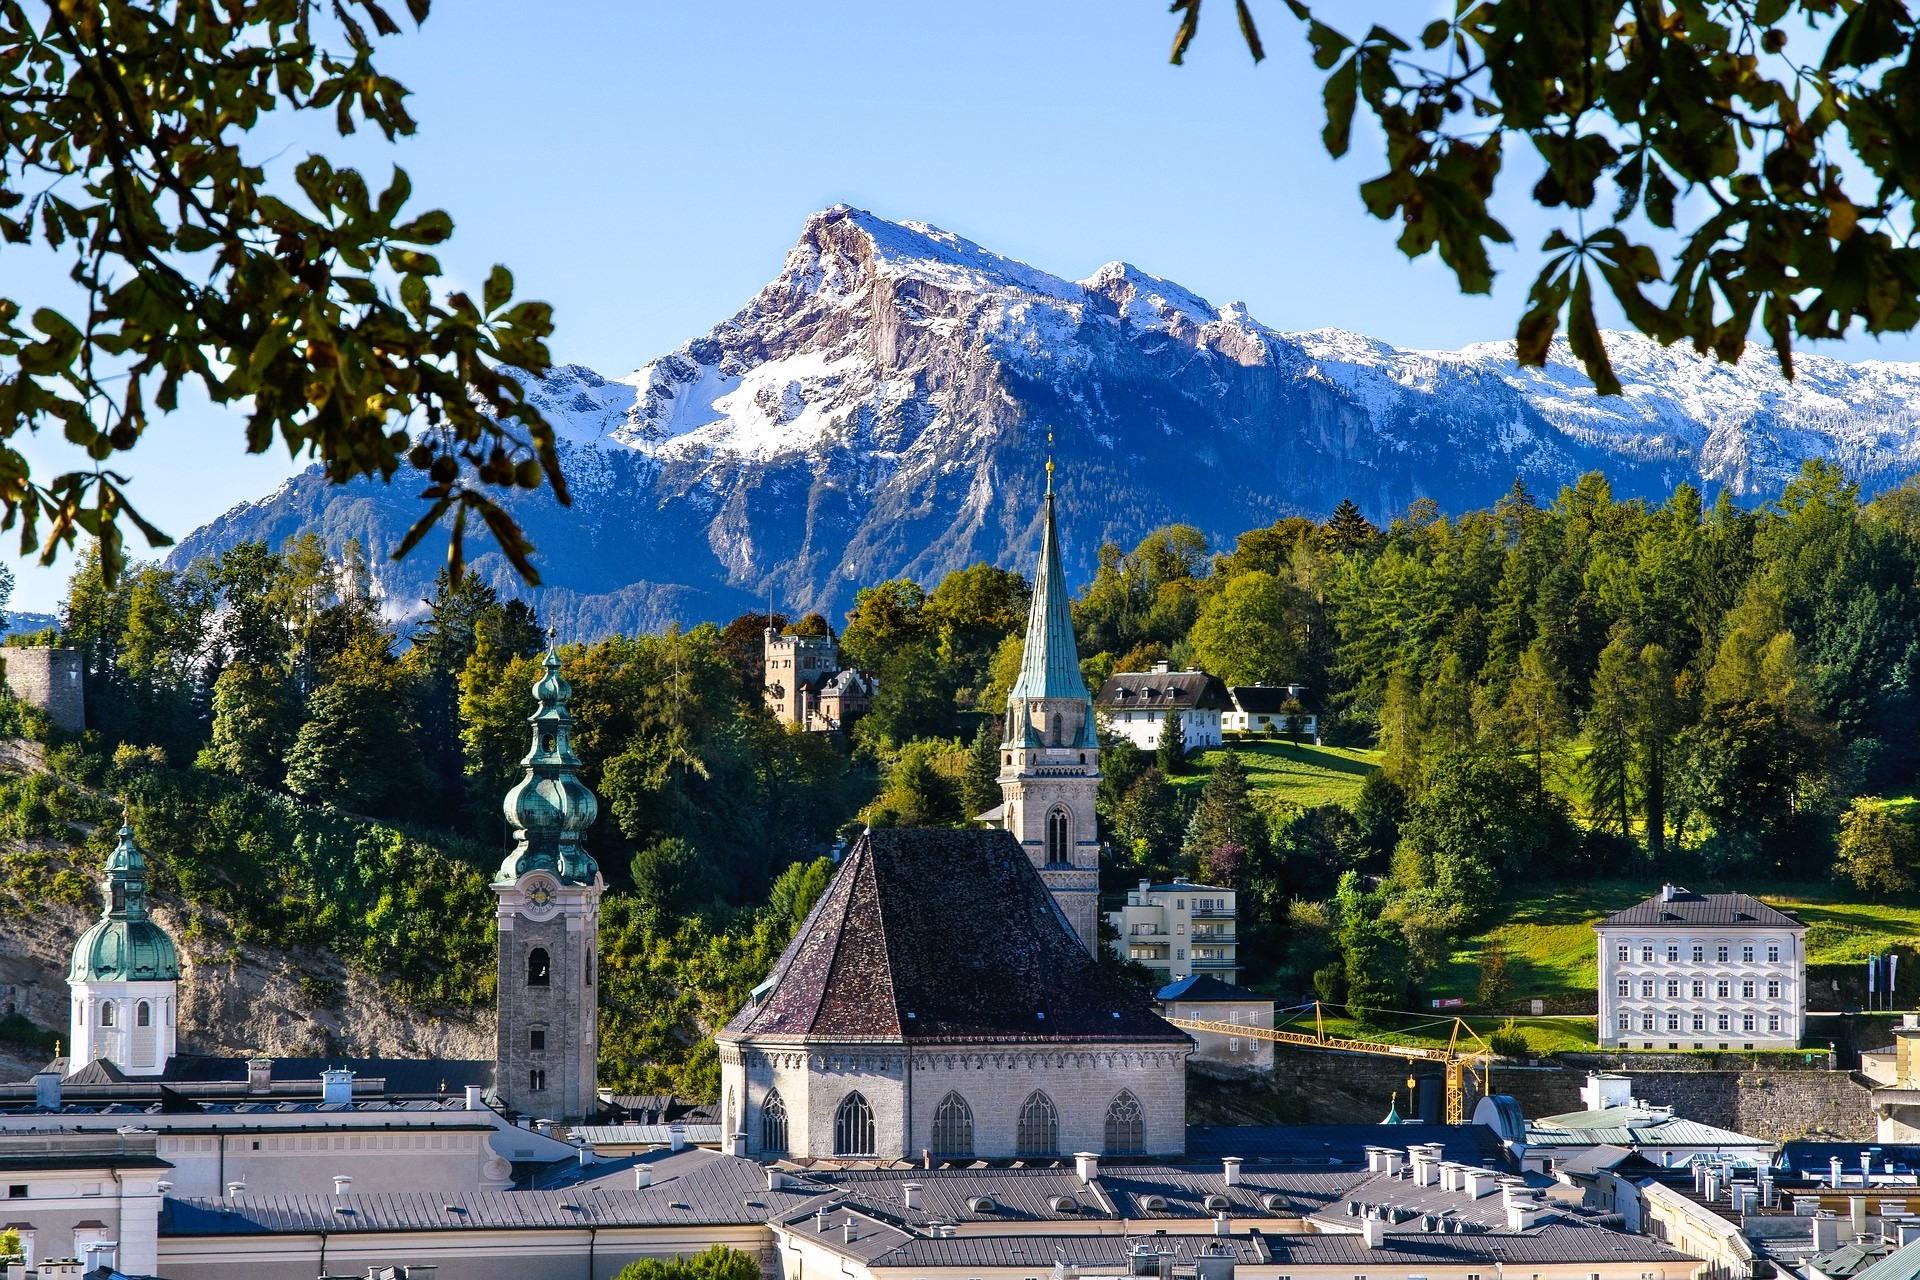 mountain with alpine town with church steeple